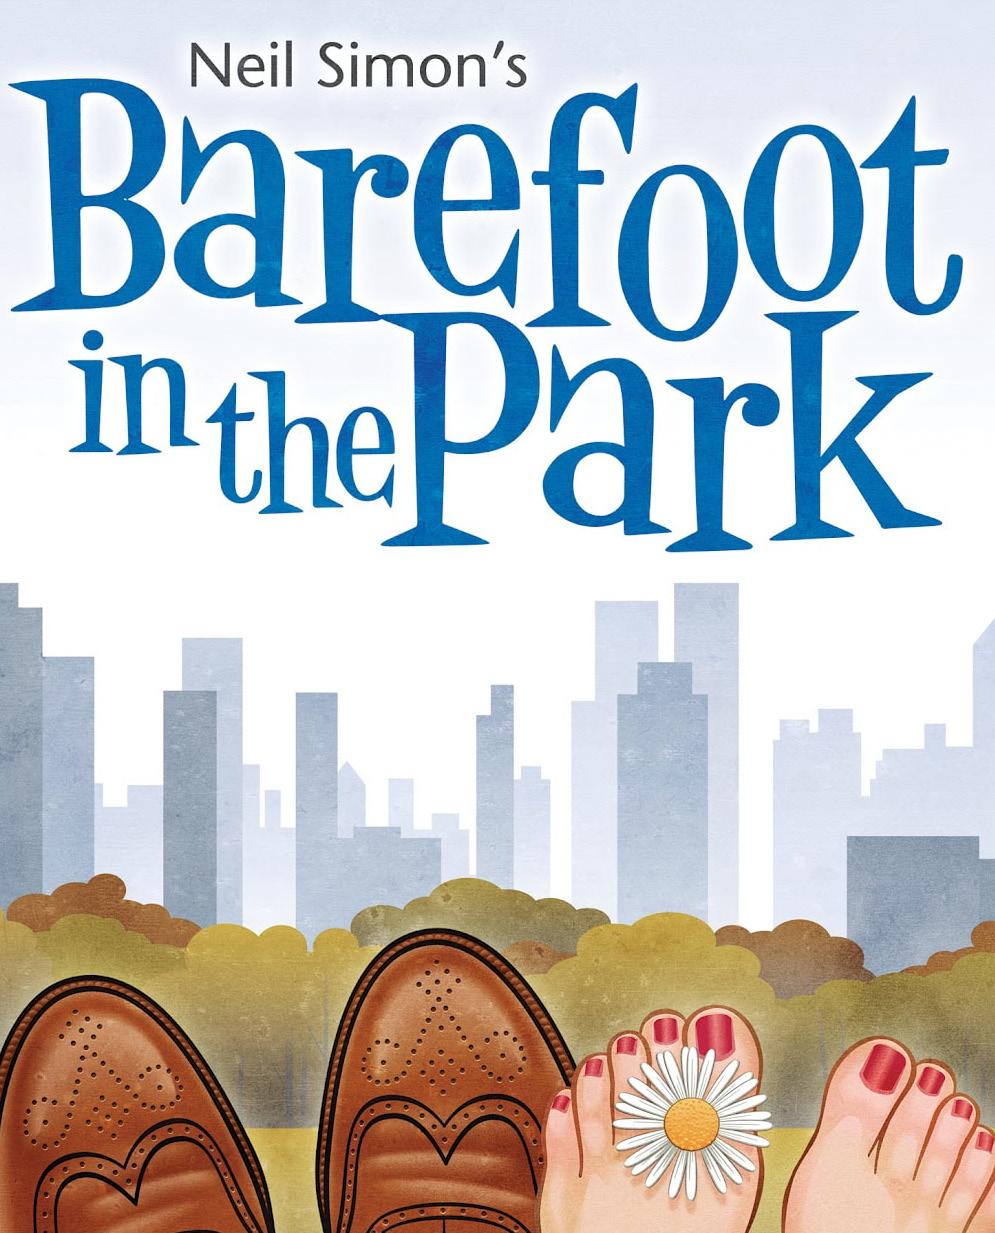 Nov 15 - Dec 2, Barefoot in the Park Paul and Corie Bratter are newlyweds in every sense of the word. He s a straight-as-an-arrow lawyer and she s a free spirit always looking for the latest kick.